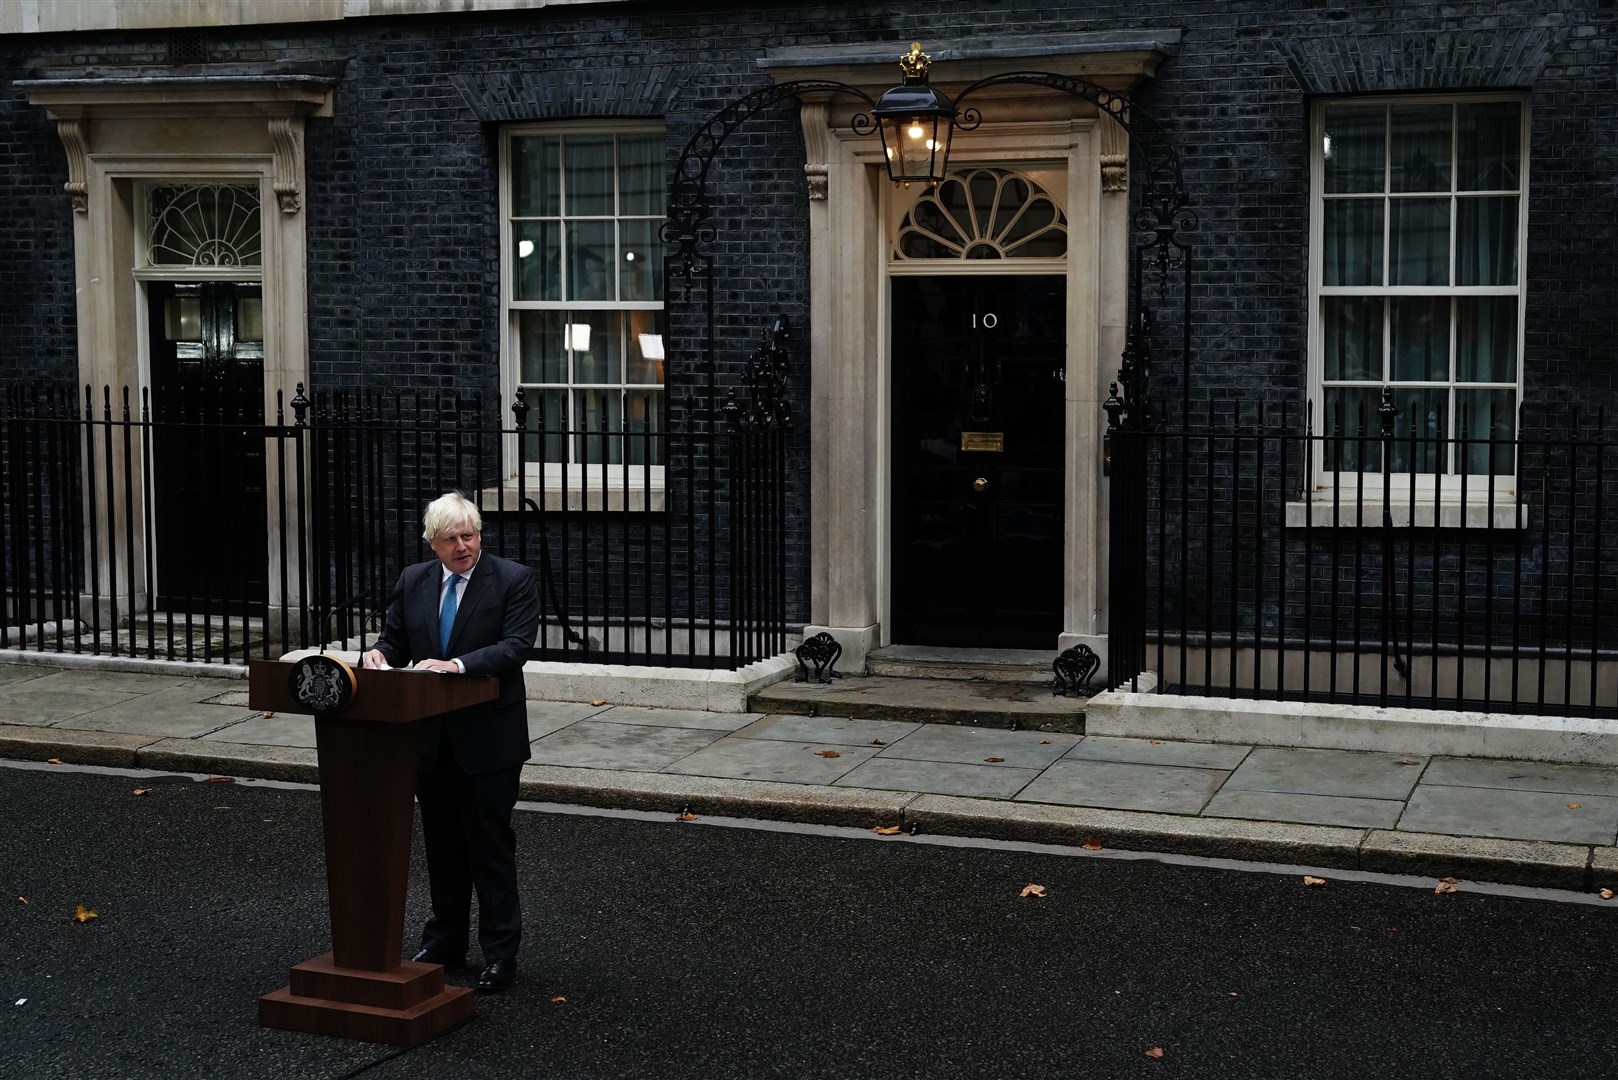 Outgoing Prime Minister Boris Johnson makes a speech outside 10 Downing Street, London, before leaving for Balmoral for an audience with the Queen (Aaron Chown/PA)